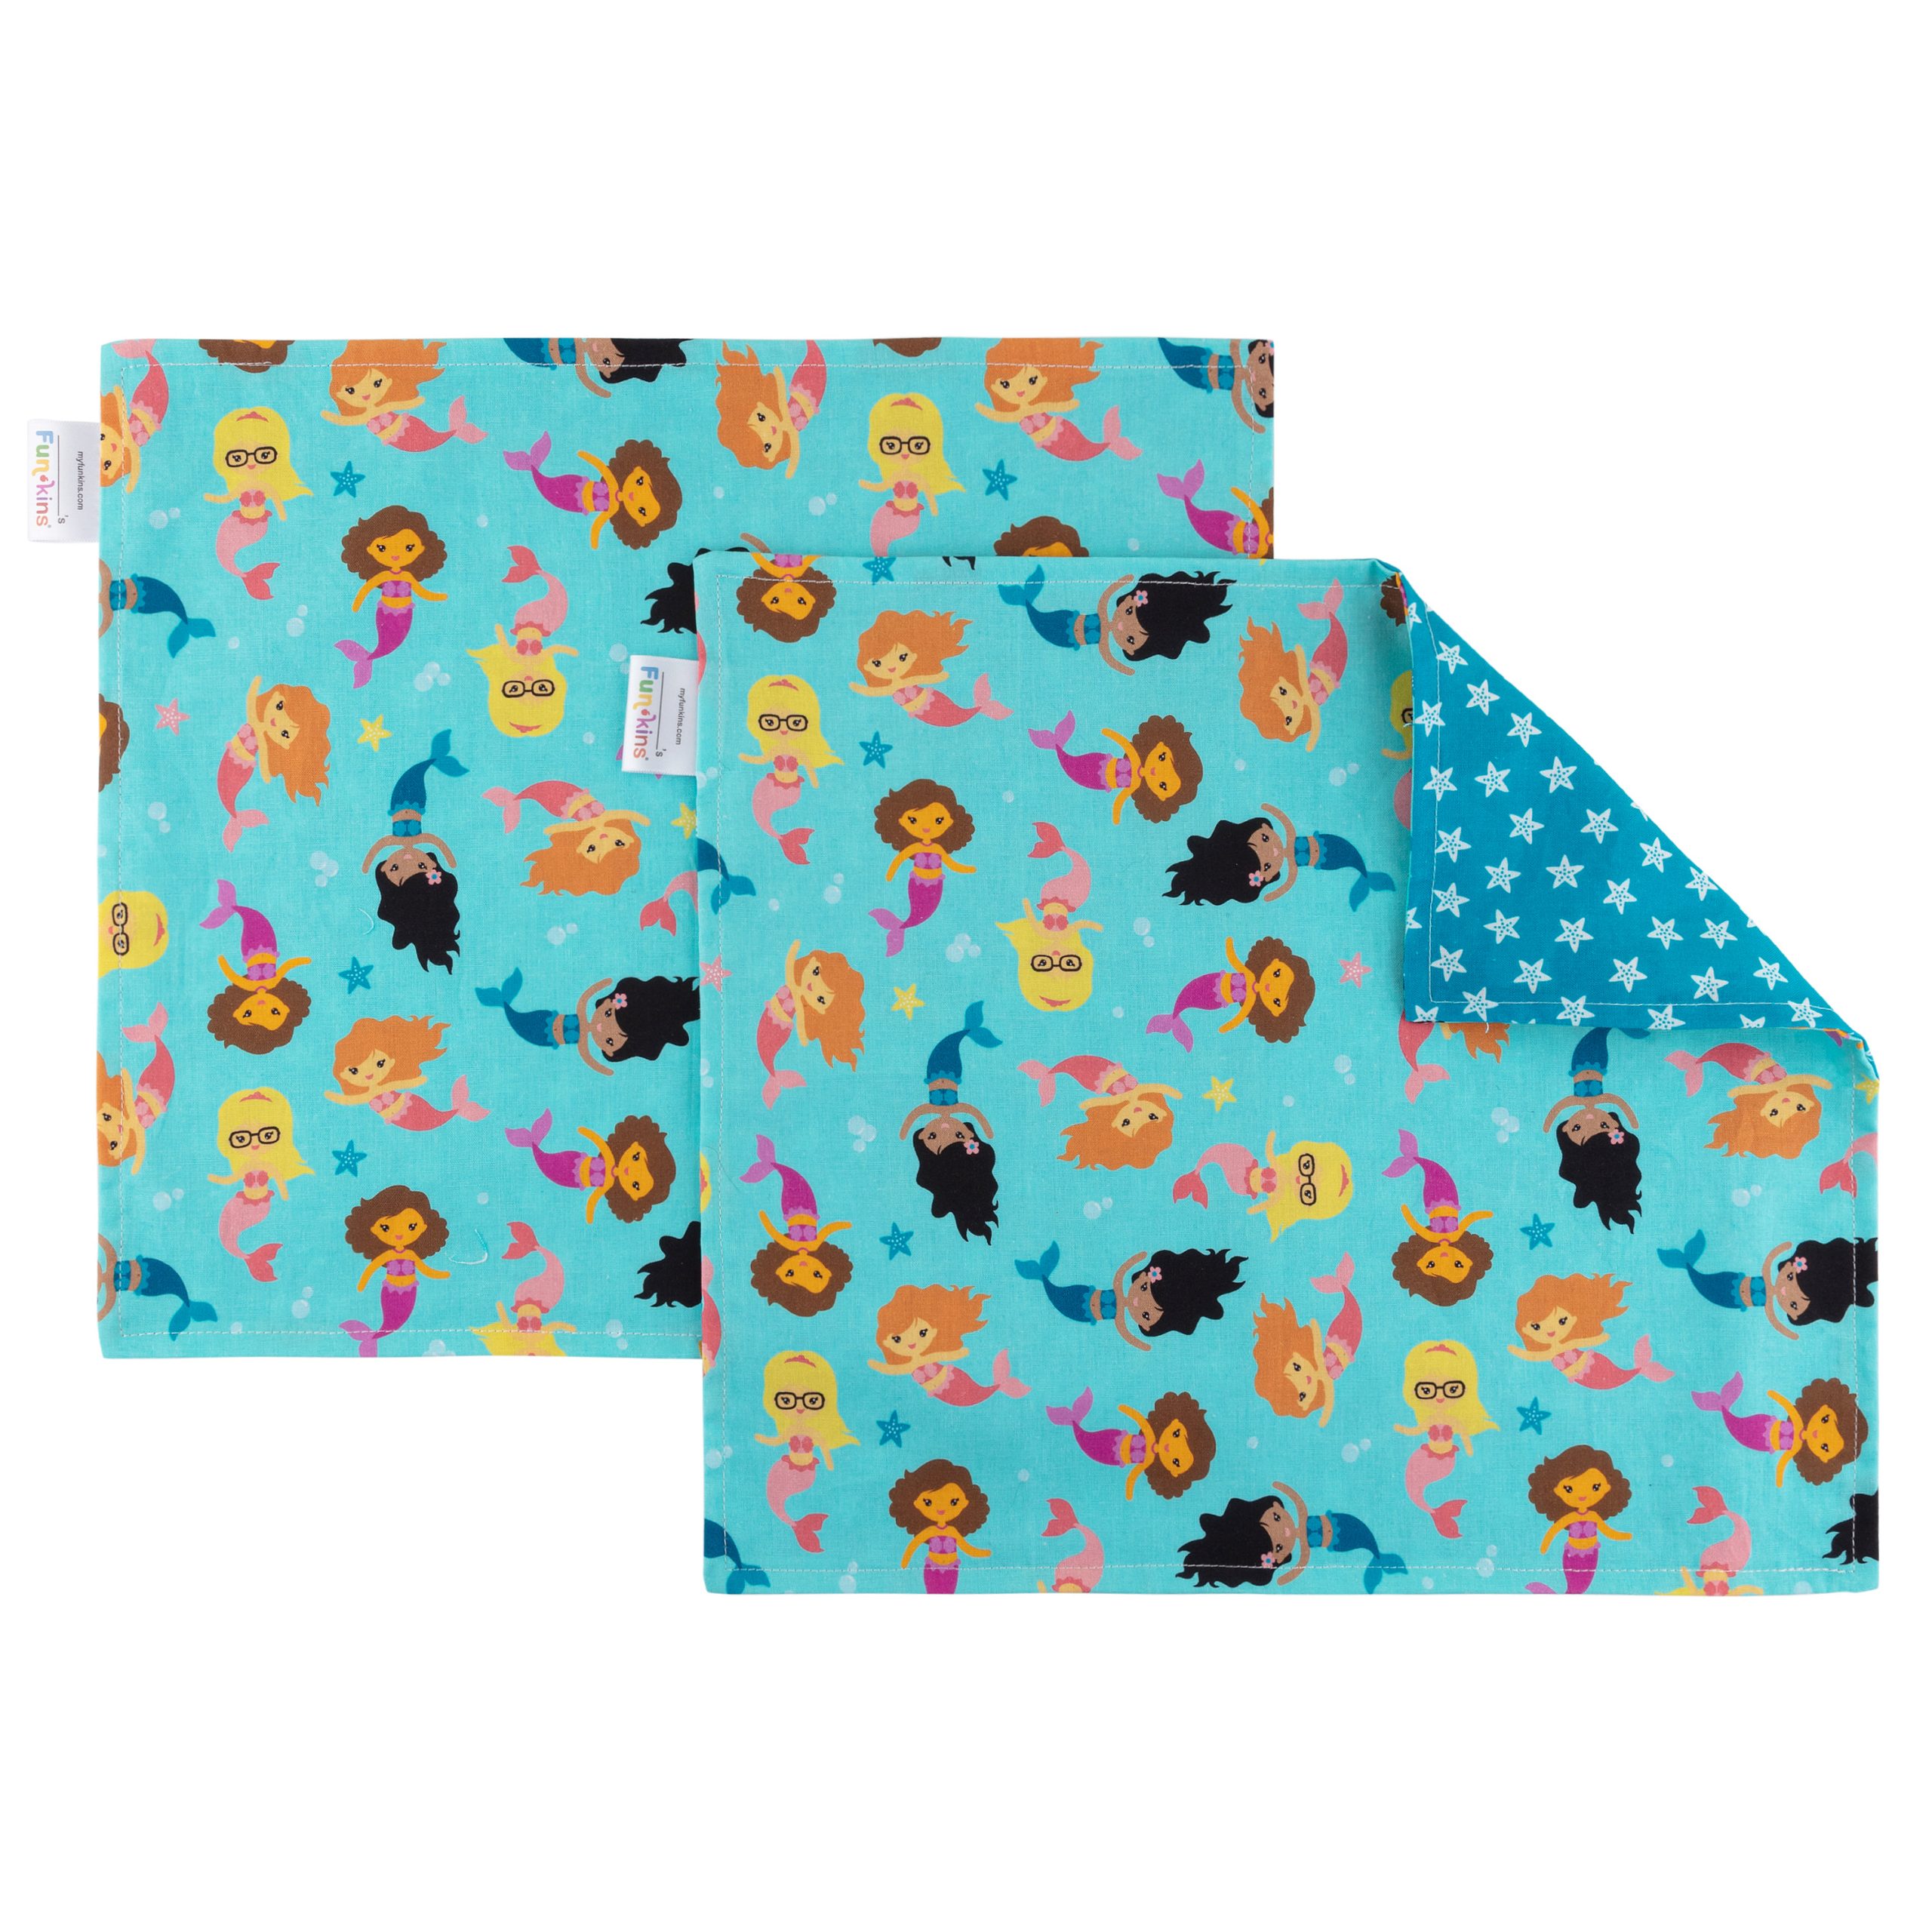 Funkins Reusable Cloth Napkins and Placemats for Kids